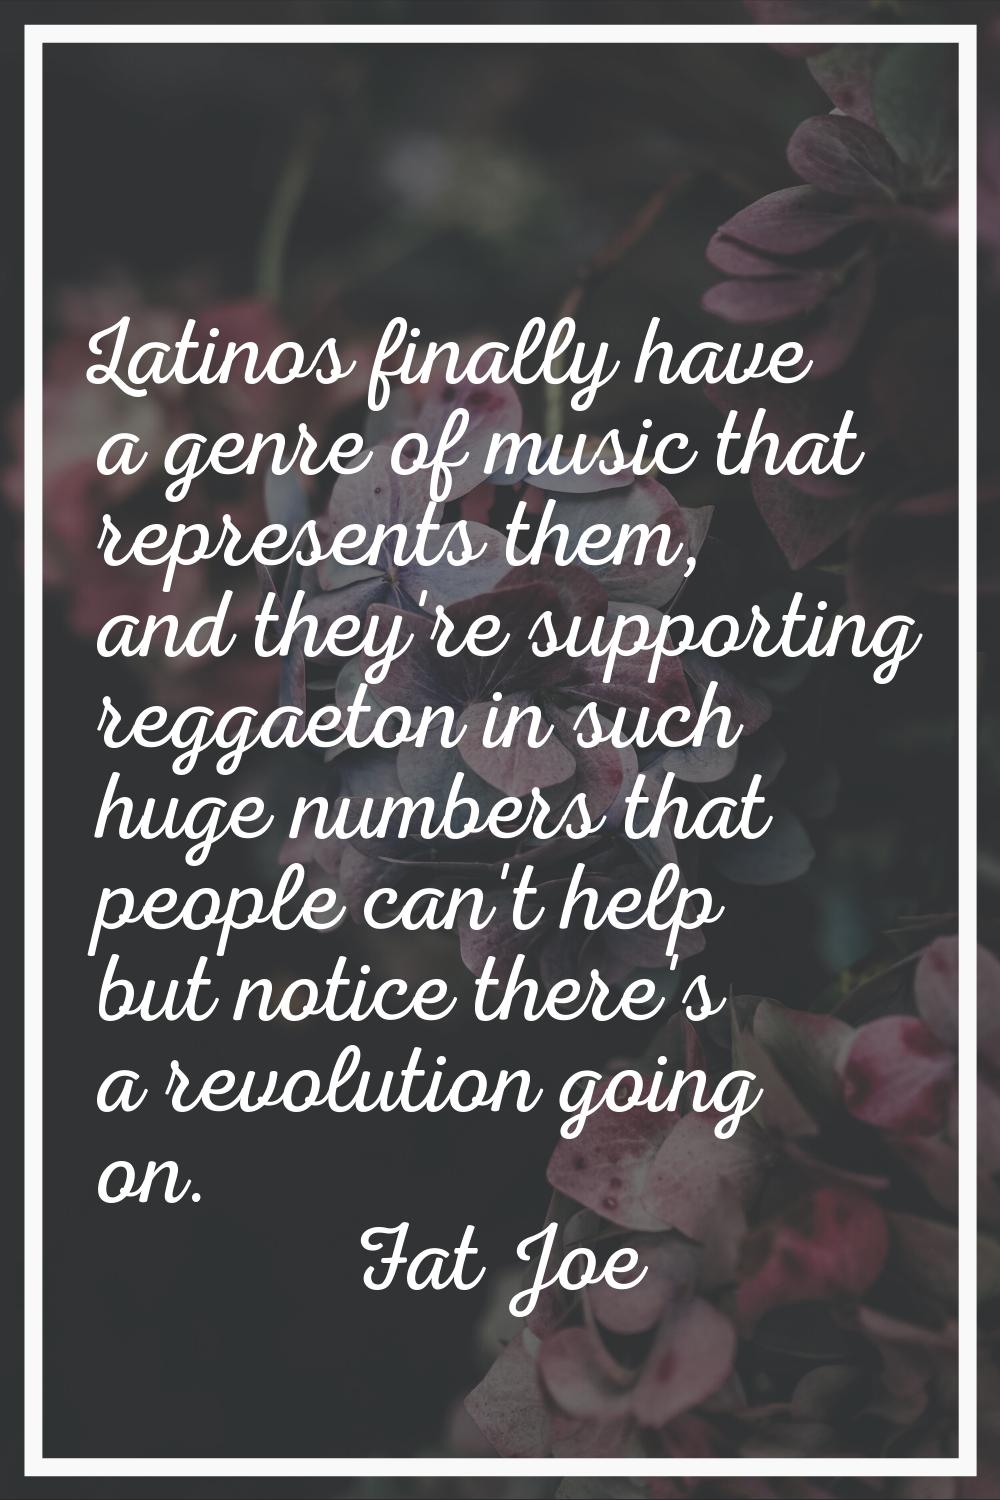 Latinos finally have a genre of music that represents them, and they're supporting reggaeton in suc